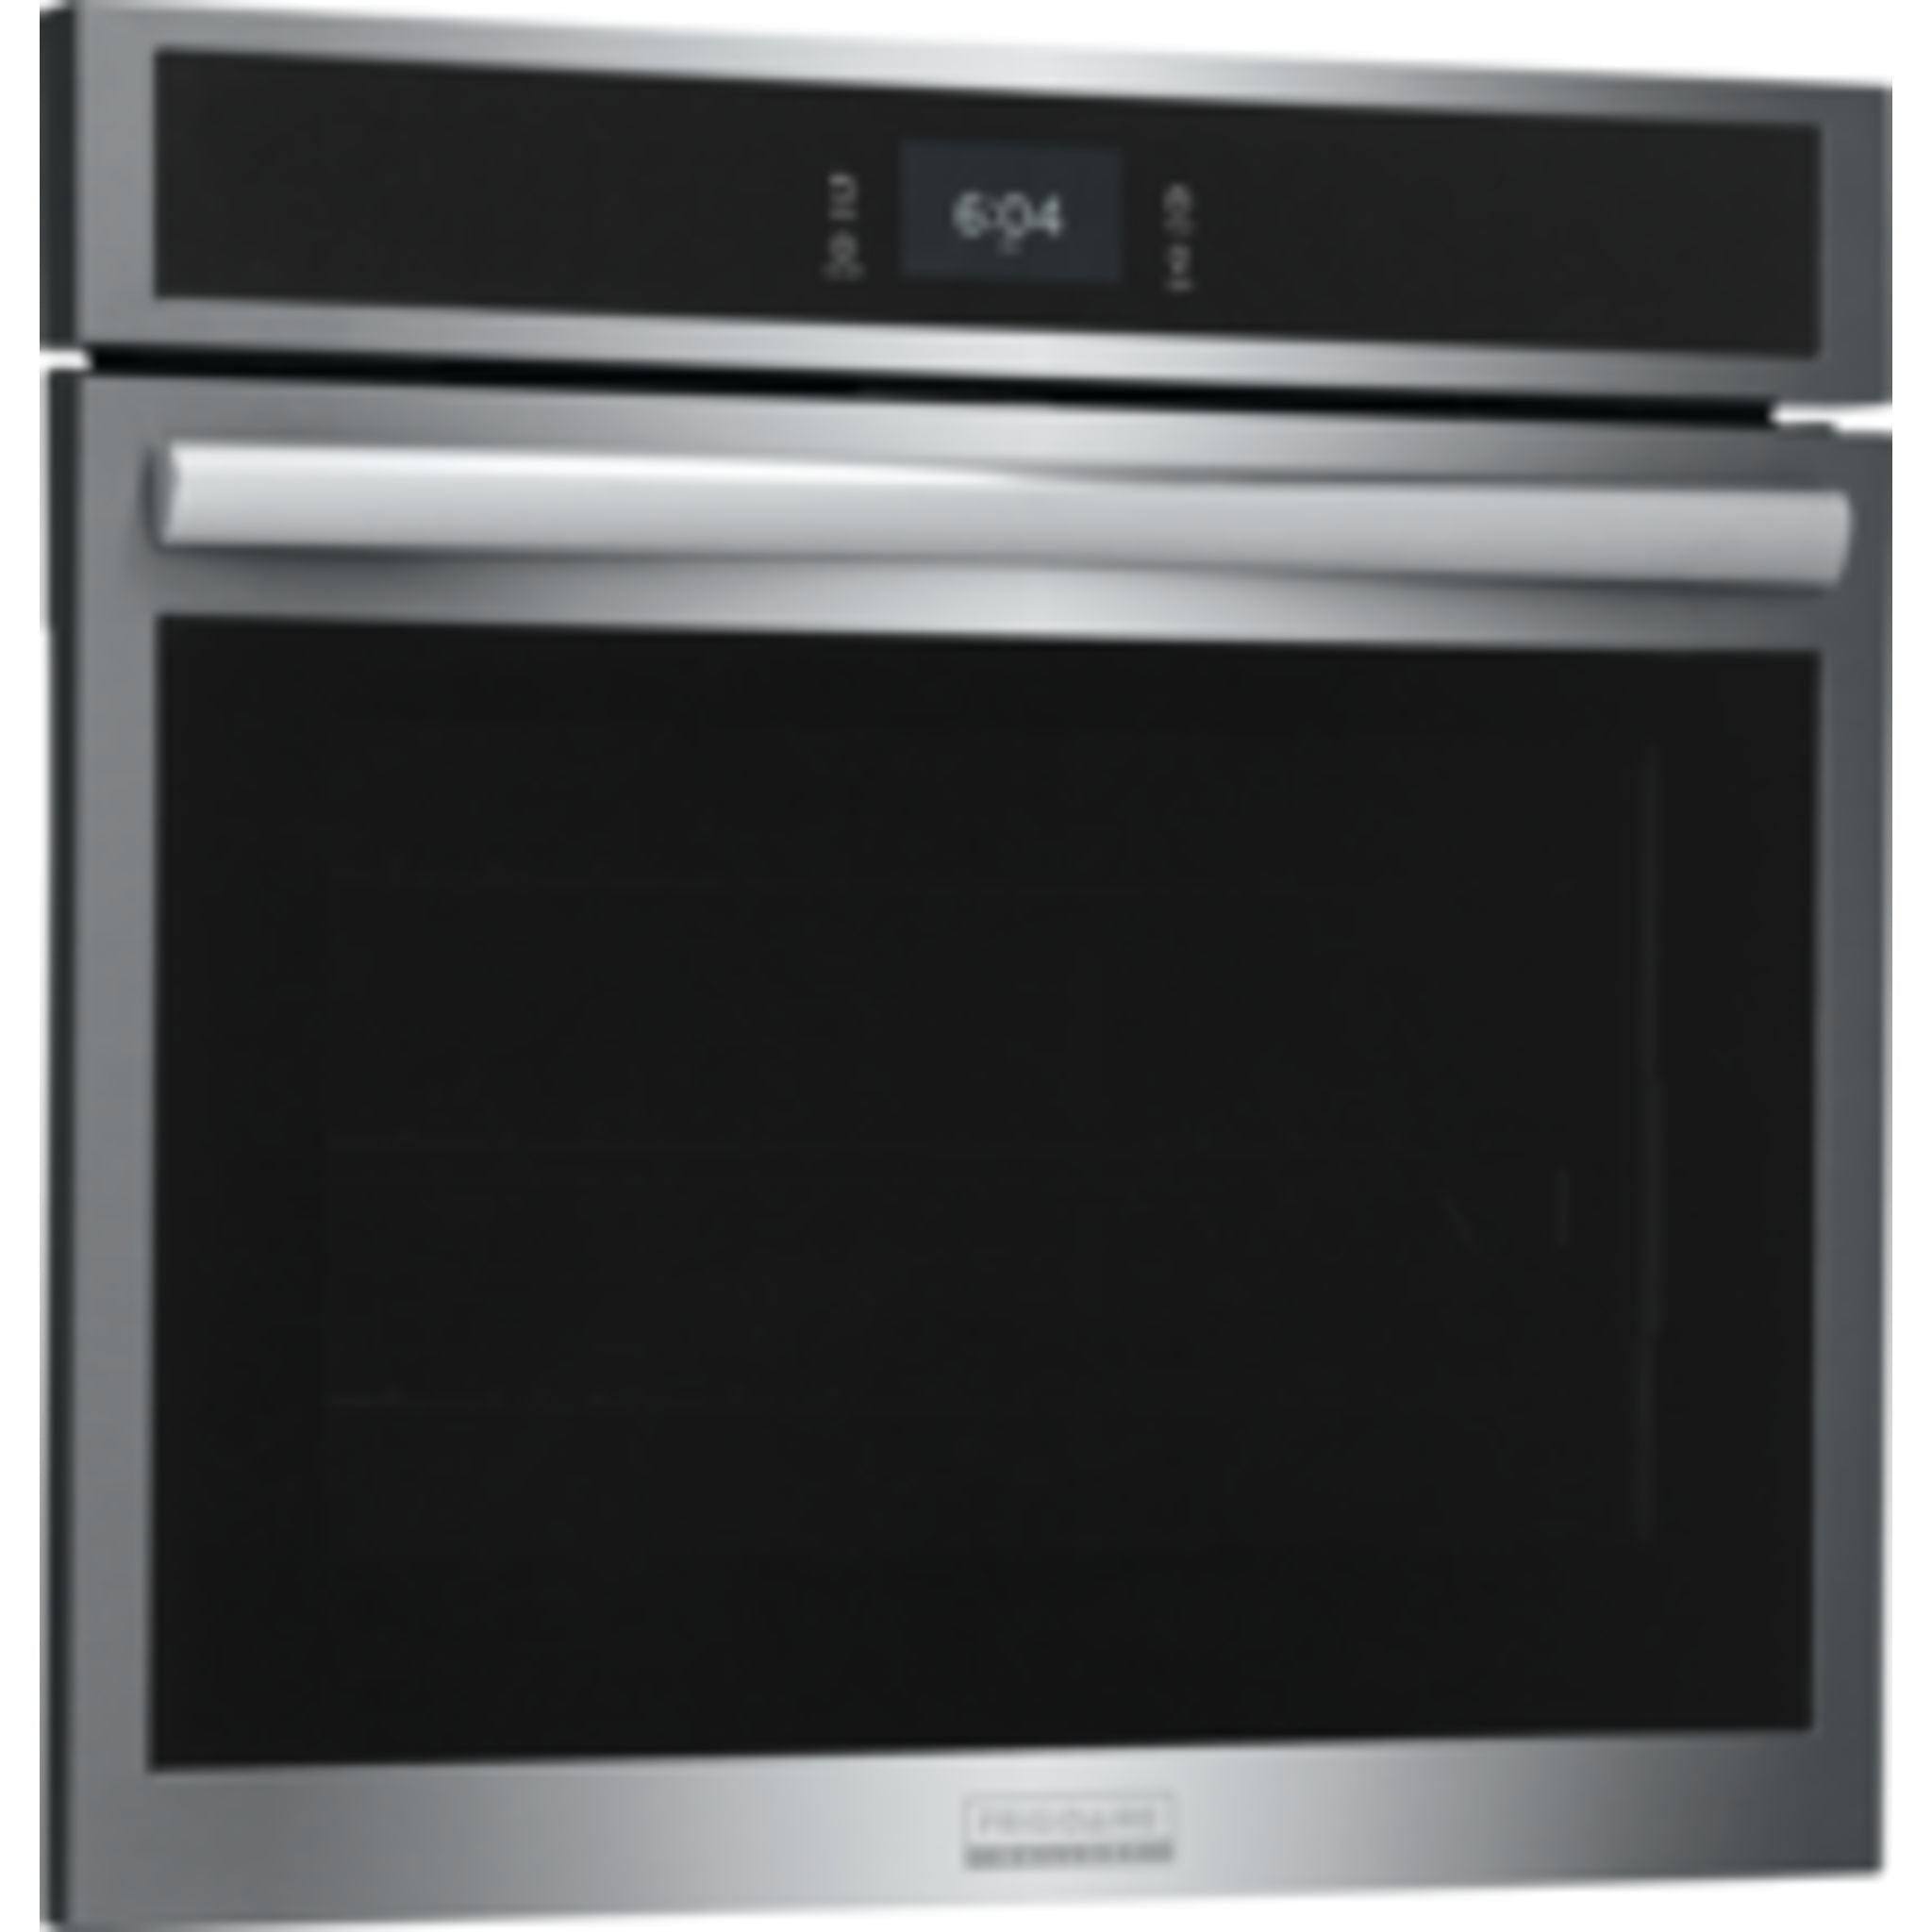 Frigidaire Gallery, Frigidaire Gallery 30" True Convection Wall Oven (GCWS3067AF) - Stainless Steel